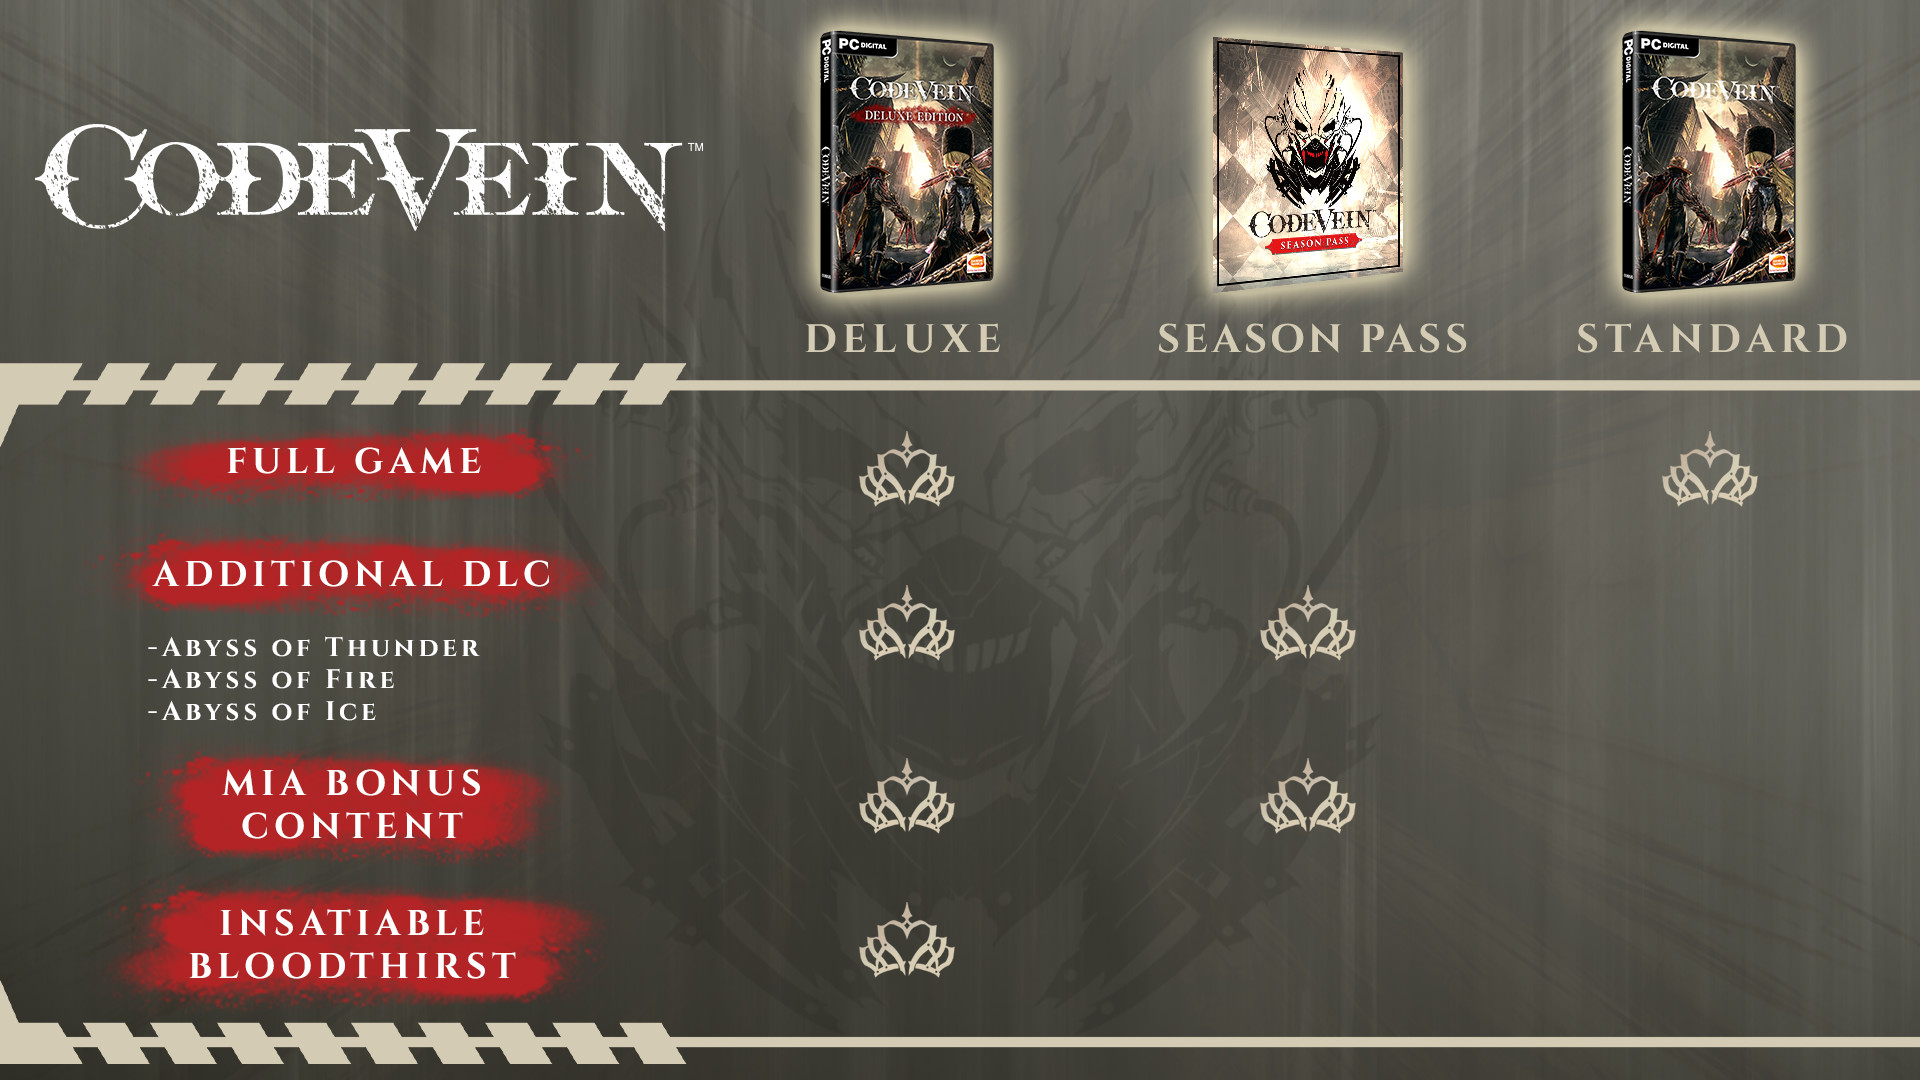 Code Vein is more popular on Steam than Dark Souls ever was